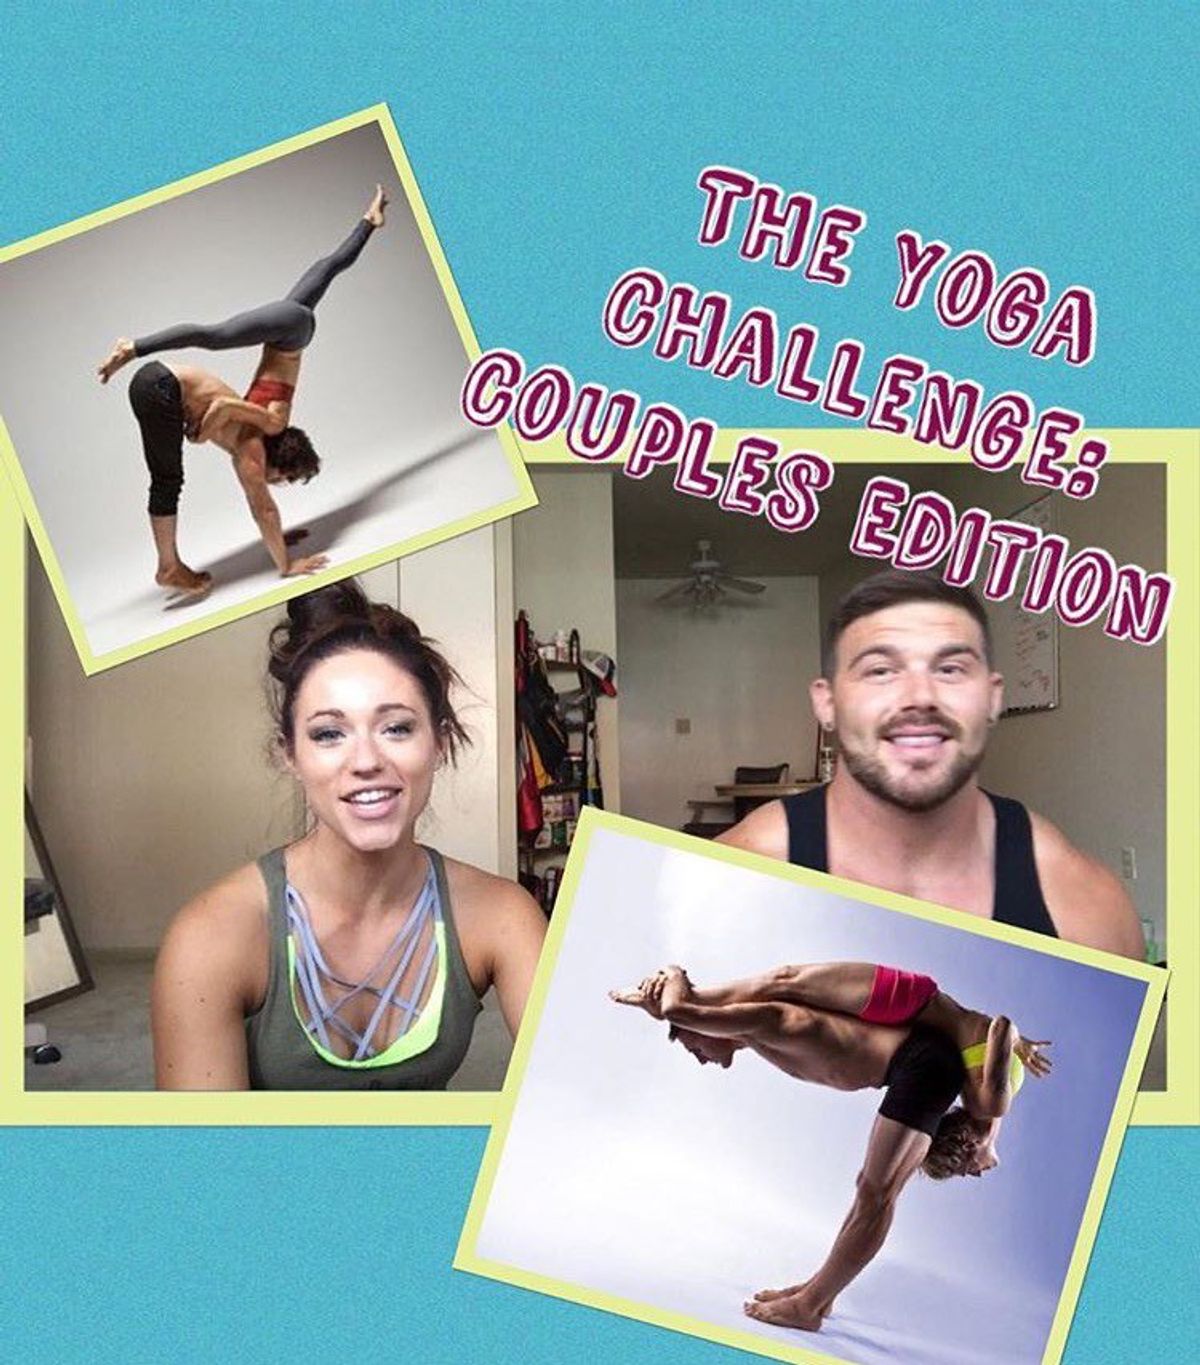 Does This Couple Have What It Takes To Complete The Yoga Challenge?